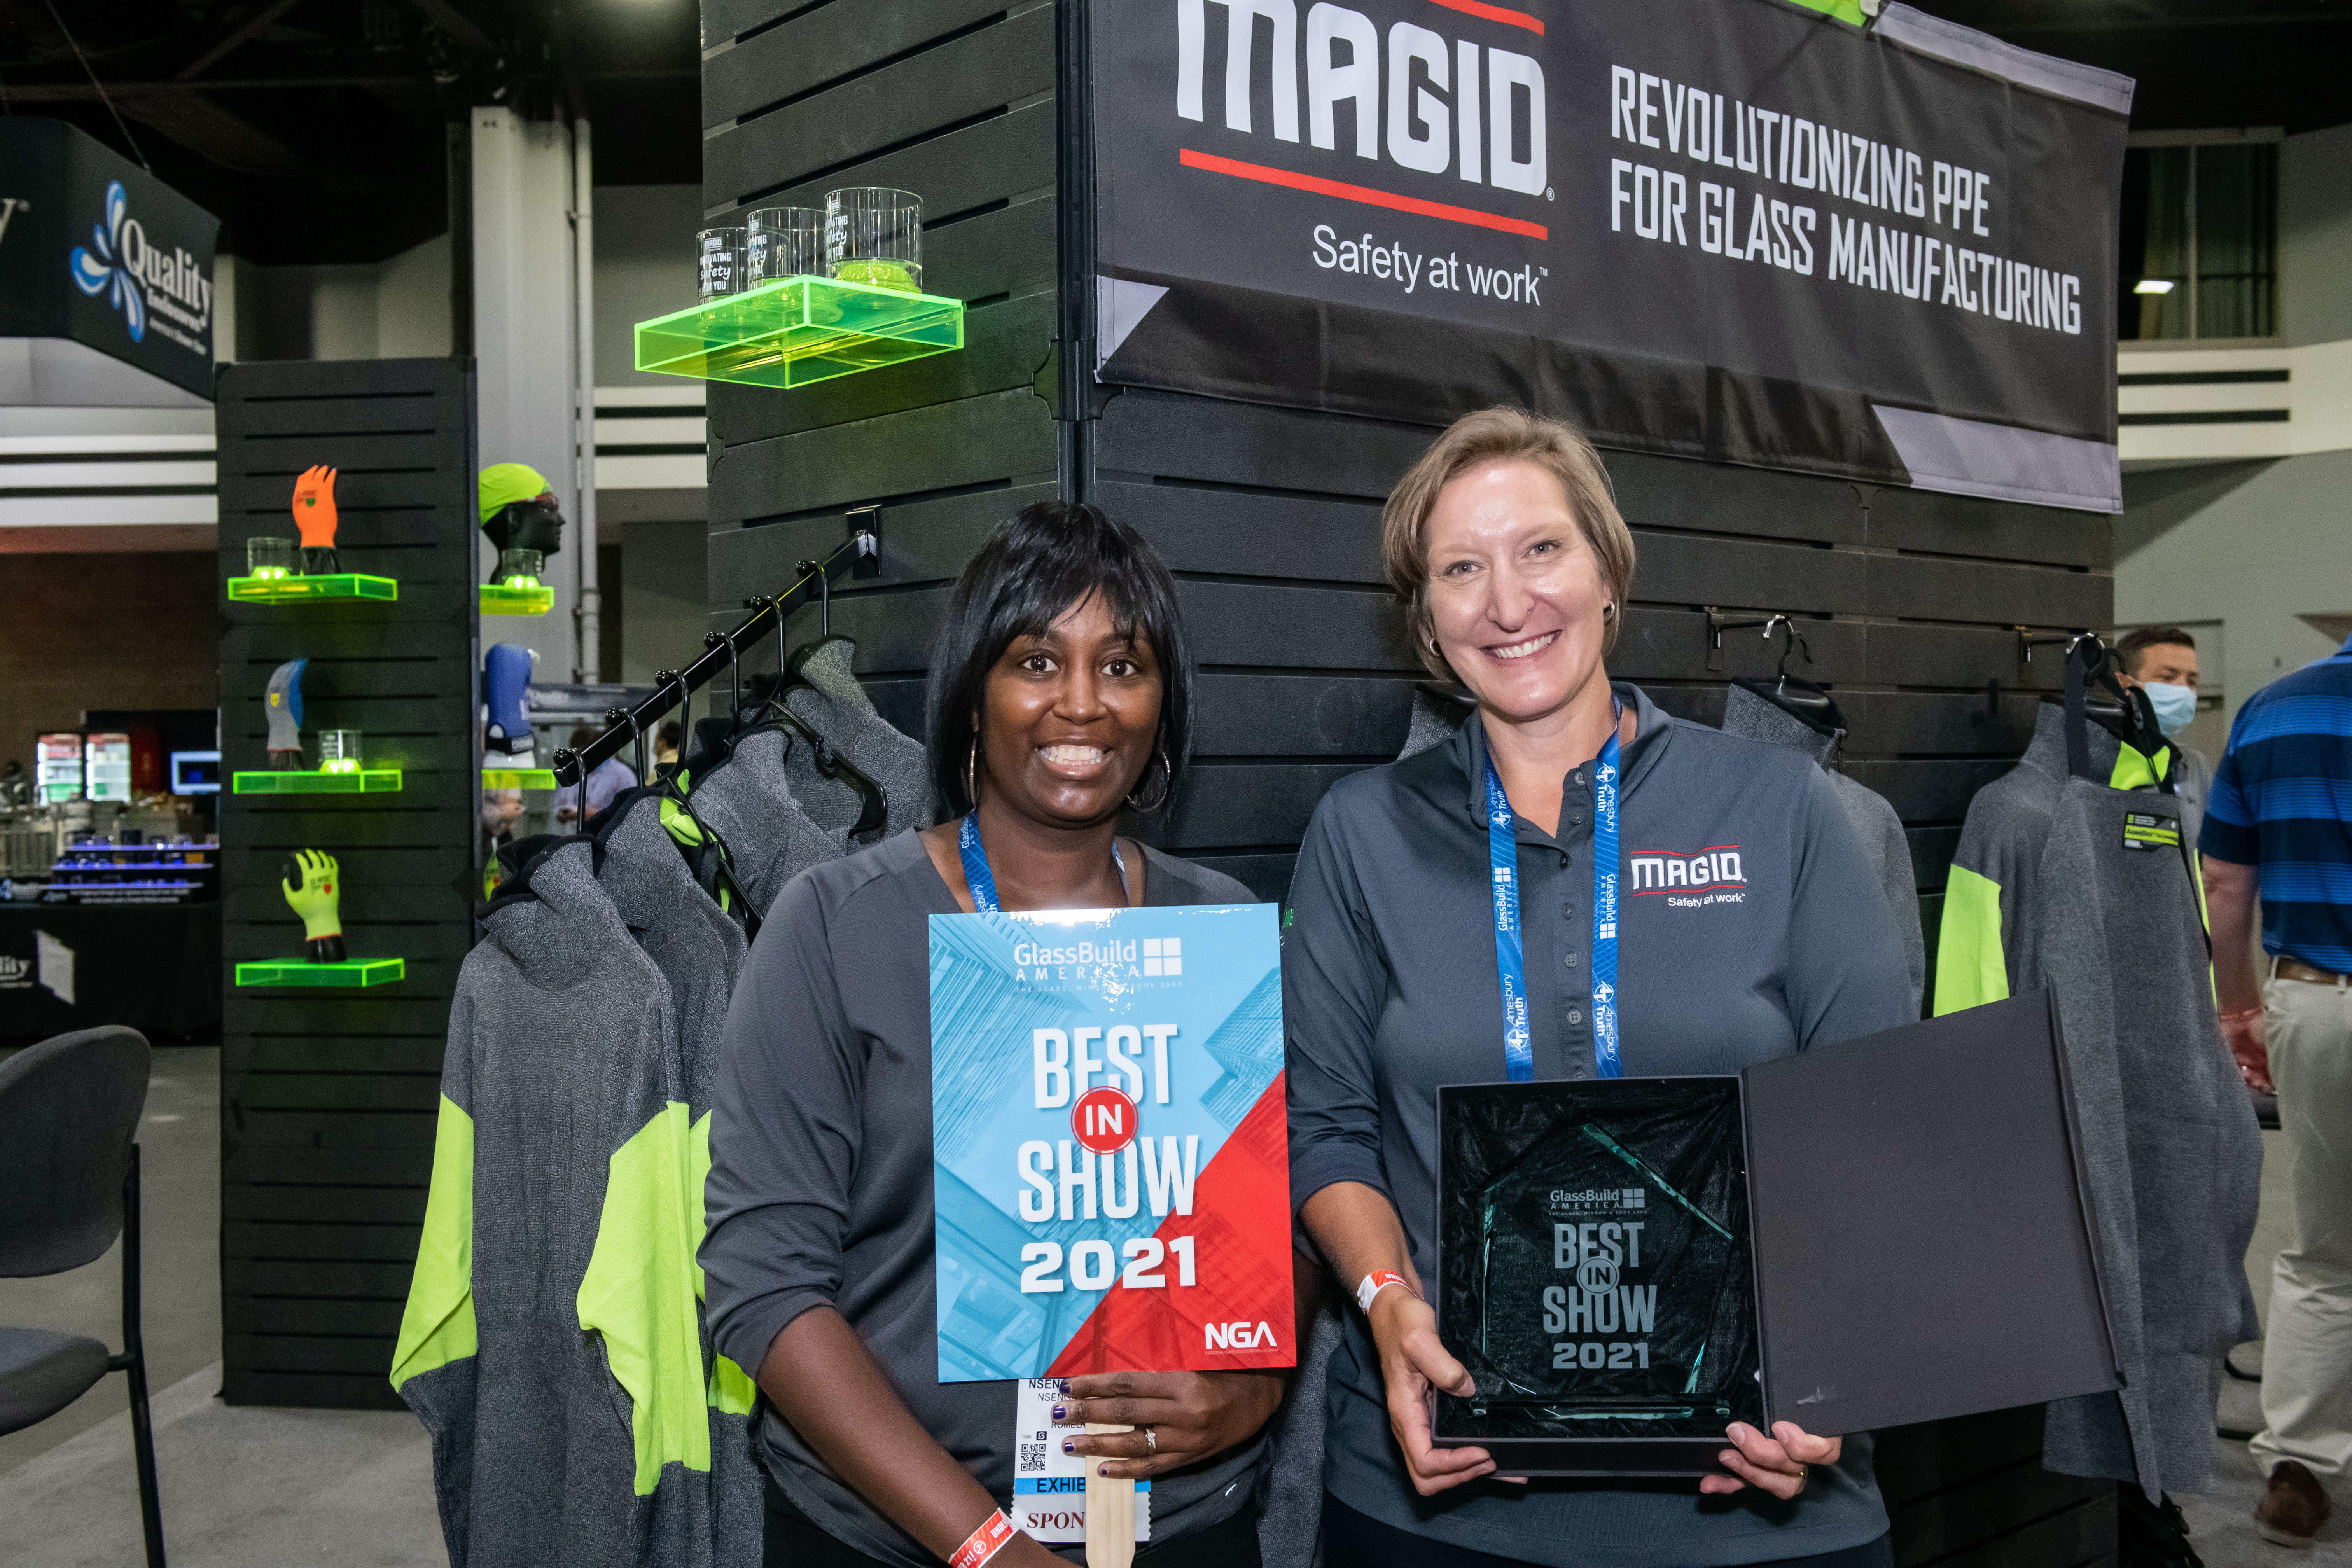 Magid receives the award for Best New Exhibitor booth at GlassBuild 2021